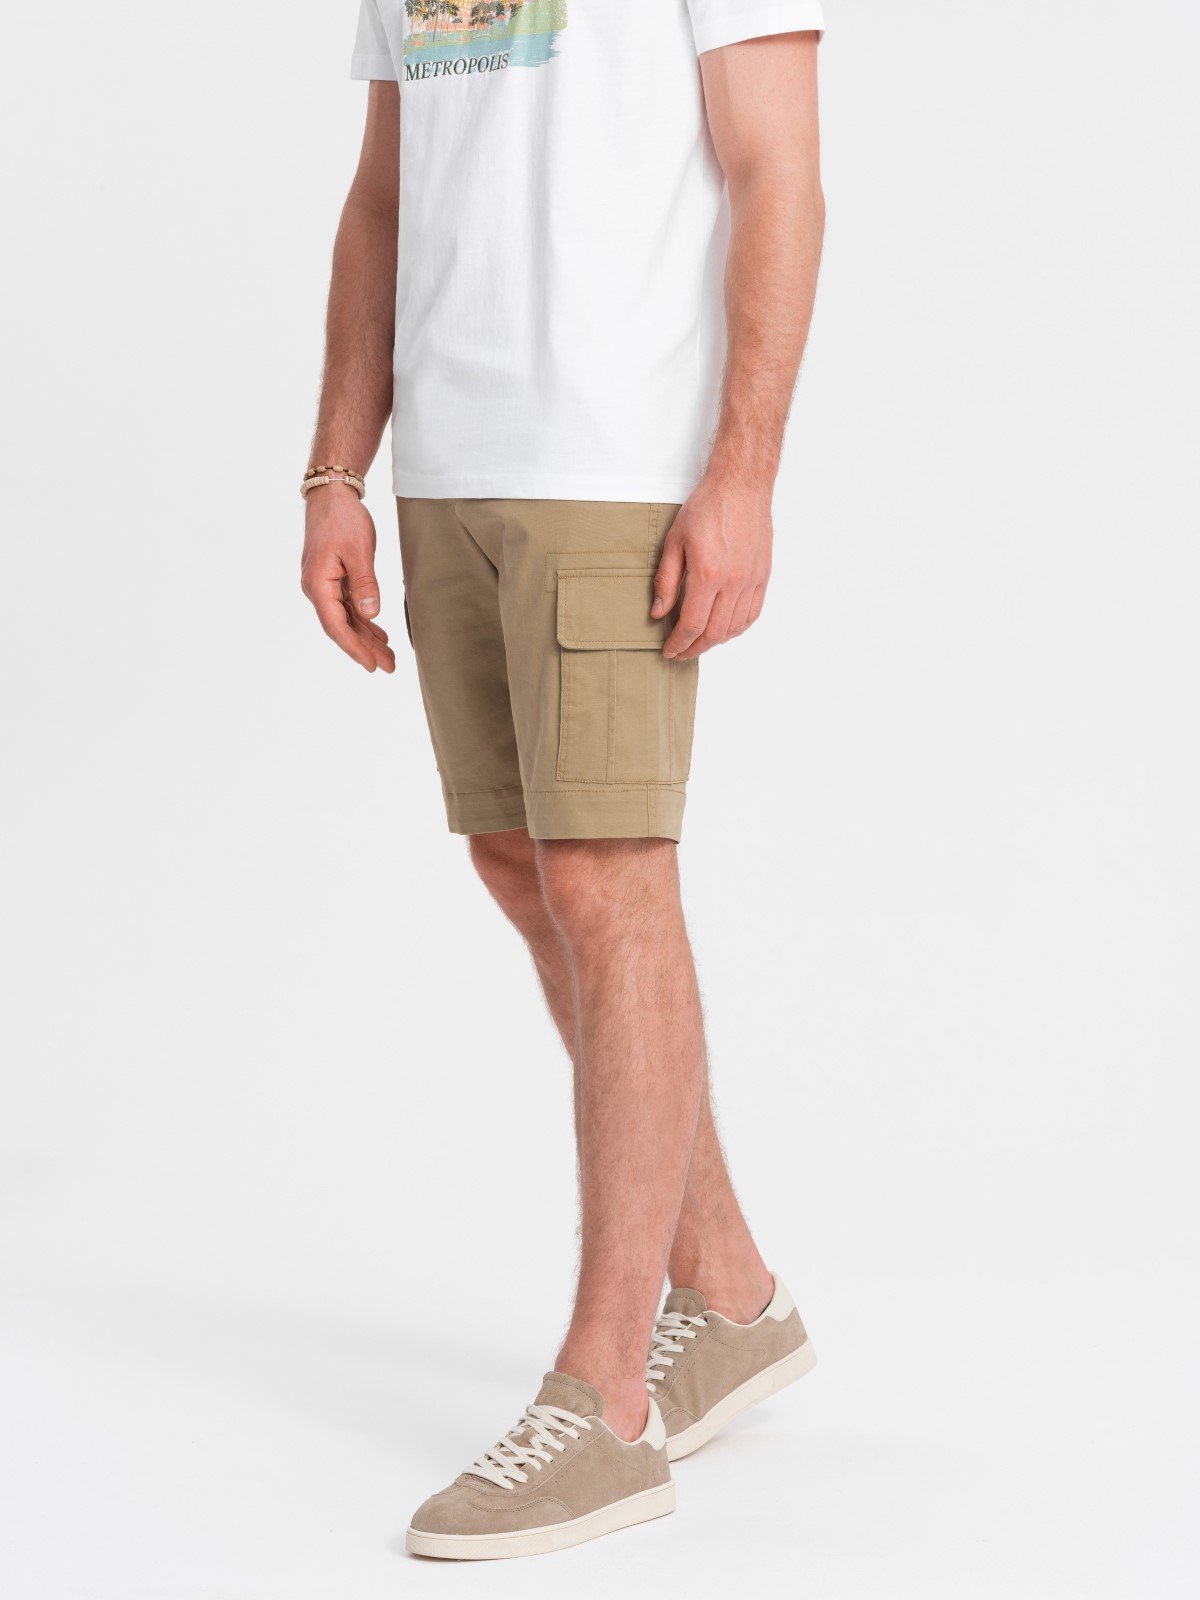 Ombre One color men's shorts with cargo pockets - sand